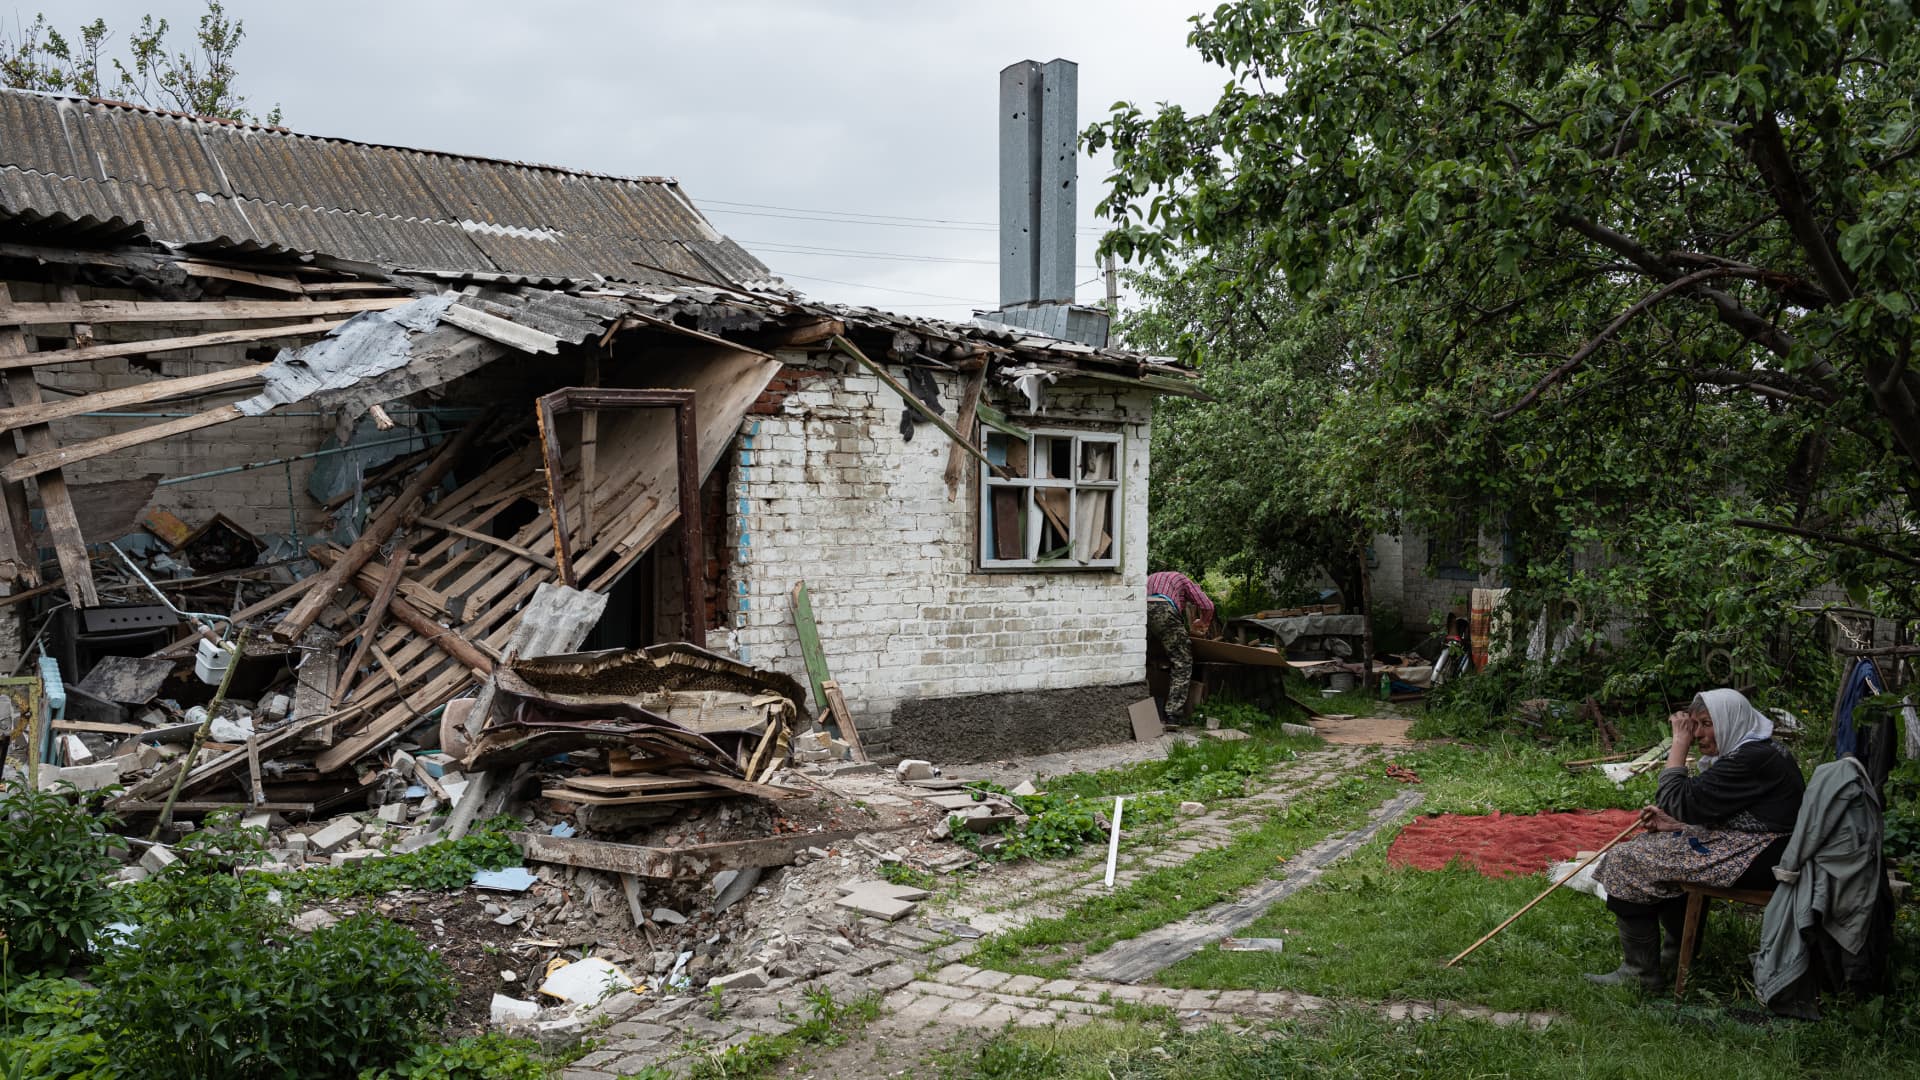 Nadiia, 75, cries next to her heavily damaged house on May 27, 2022 in Chernihiv, Ukraine. Chernihiv, northeast of Kyiv, was an early target of Russia's offensive after its Feb. 24 invasion.